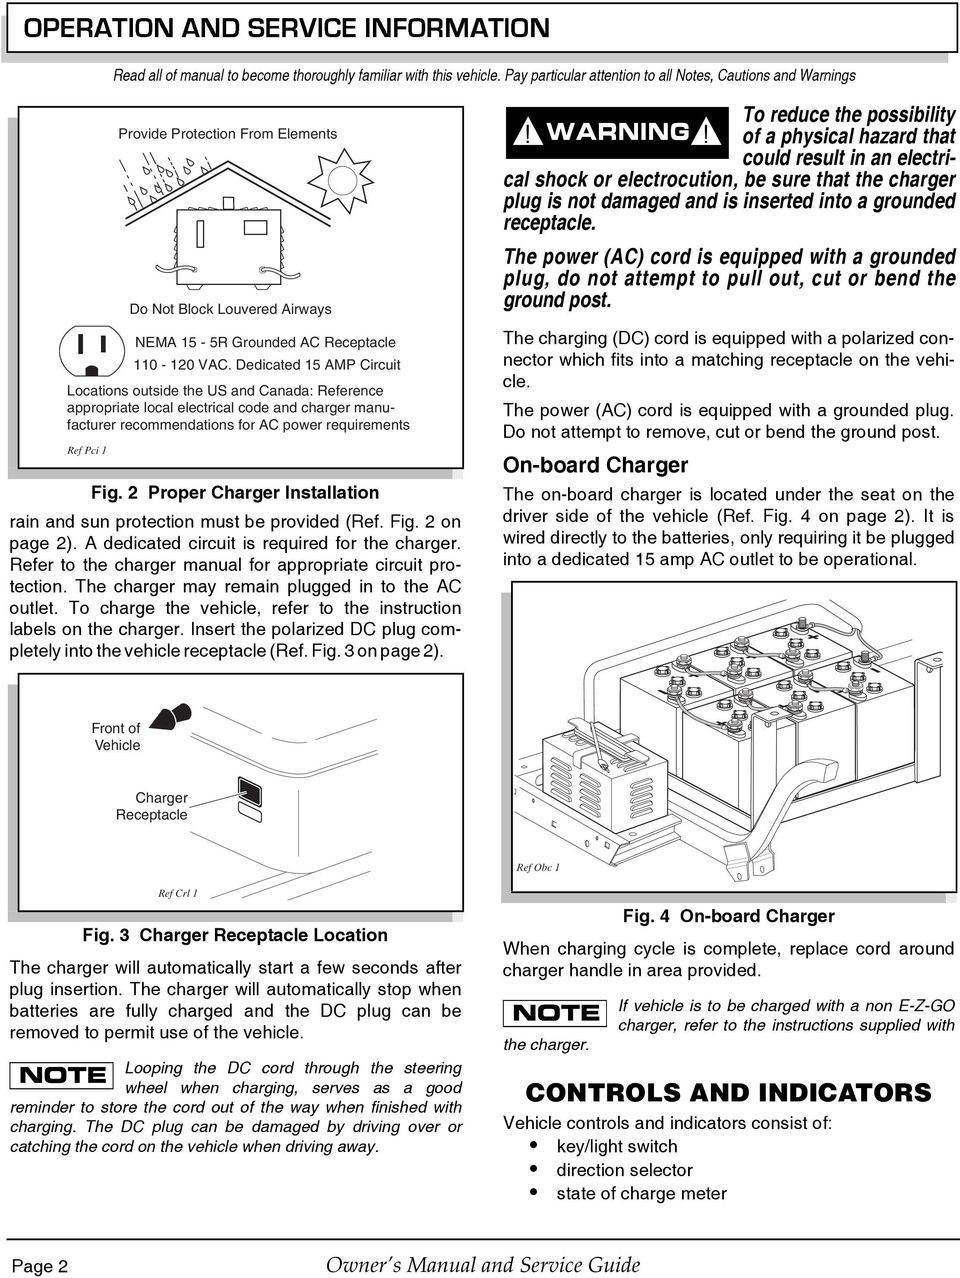 Dedicated 15 AMP Circuit Locations outside the US and Canada: Reference appropriate local electrical code and charger manufacturer recommendations for AC power requirements Ref Pci 1 Fig.